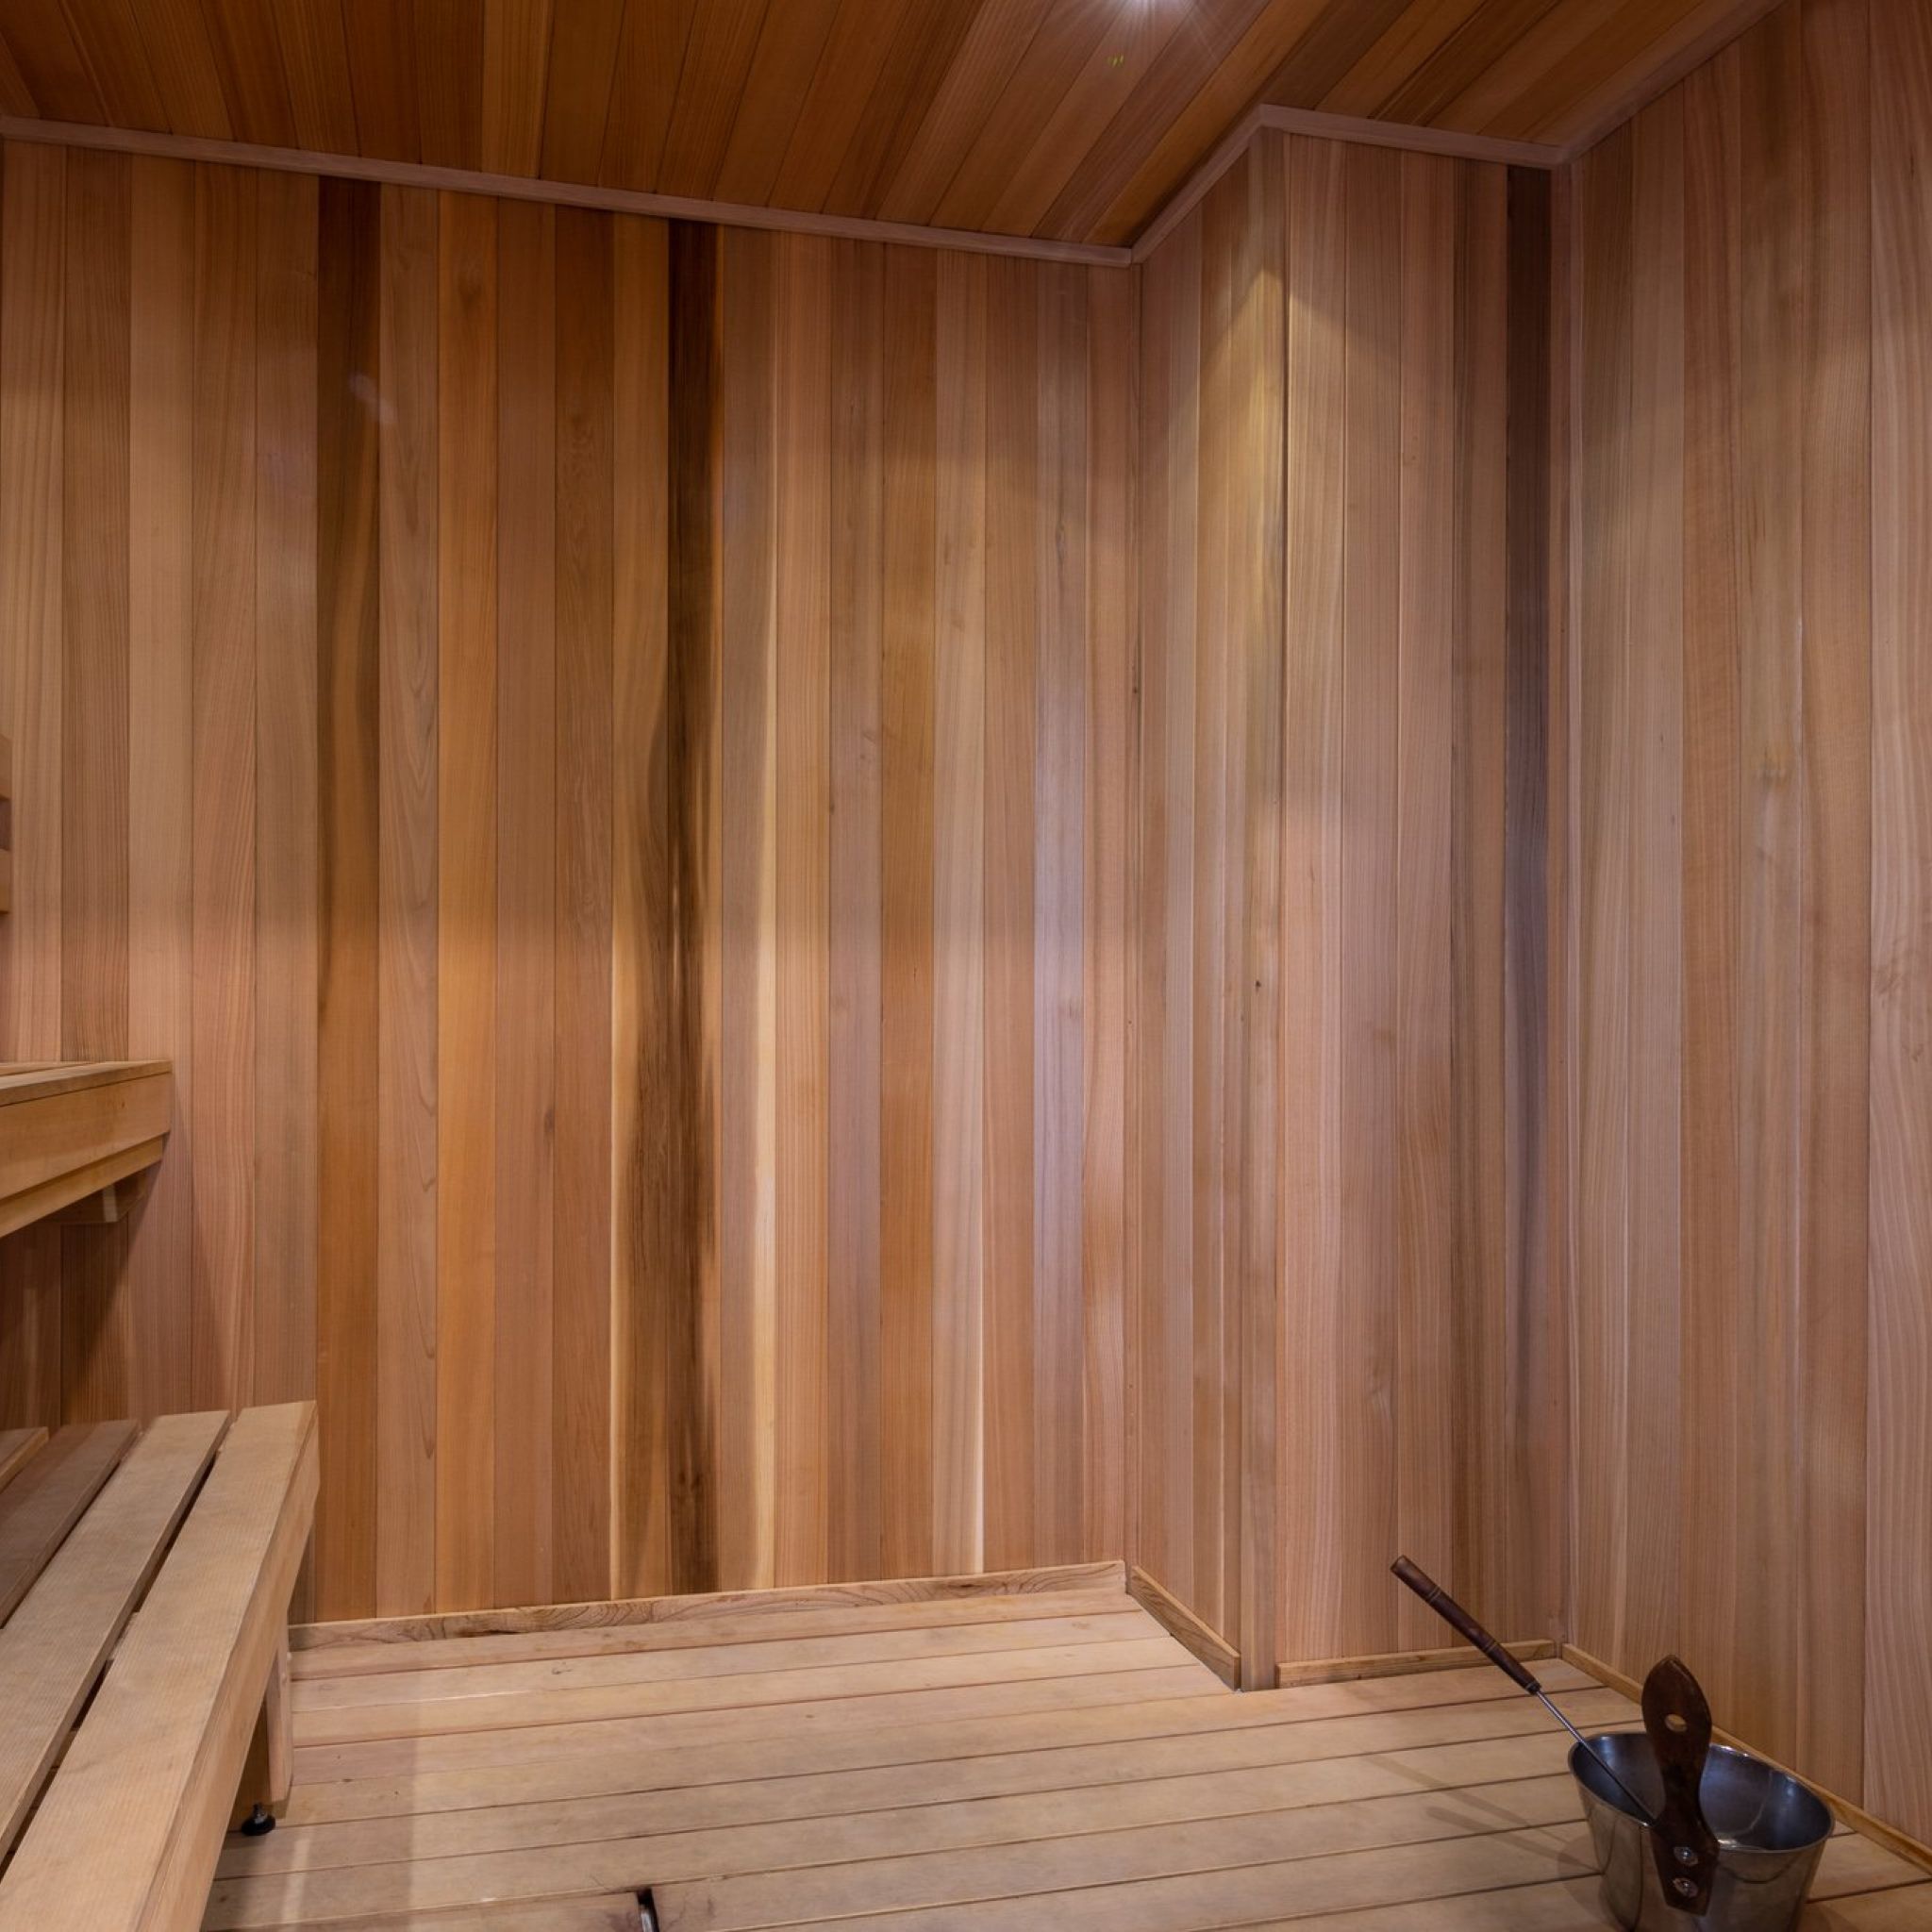 Sauna room with bench and wood flooring and walls